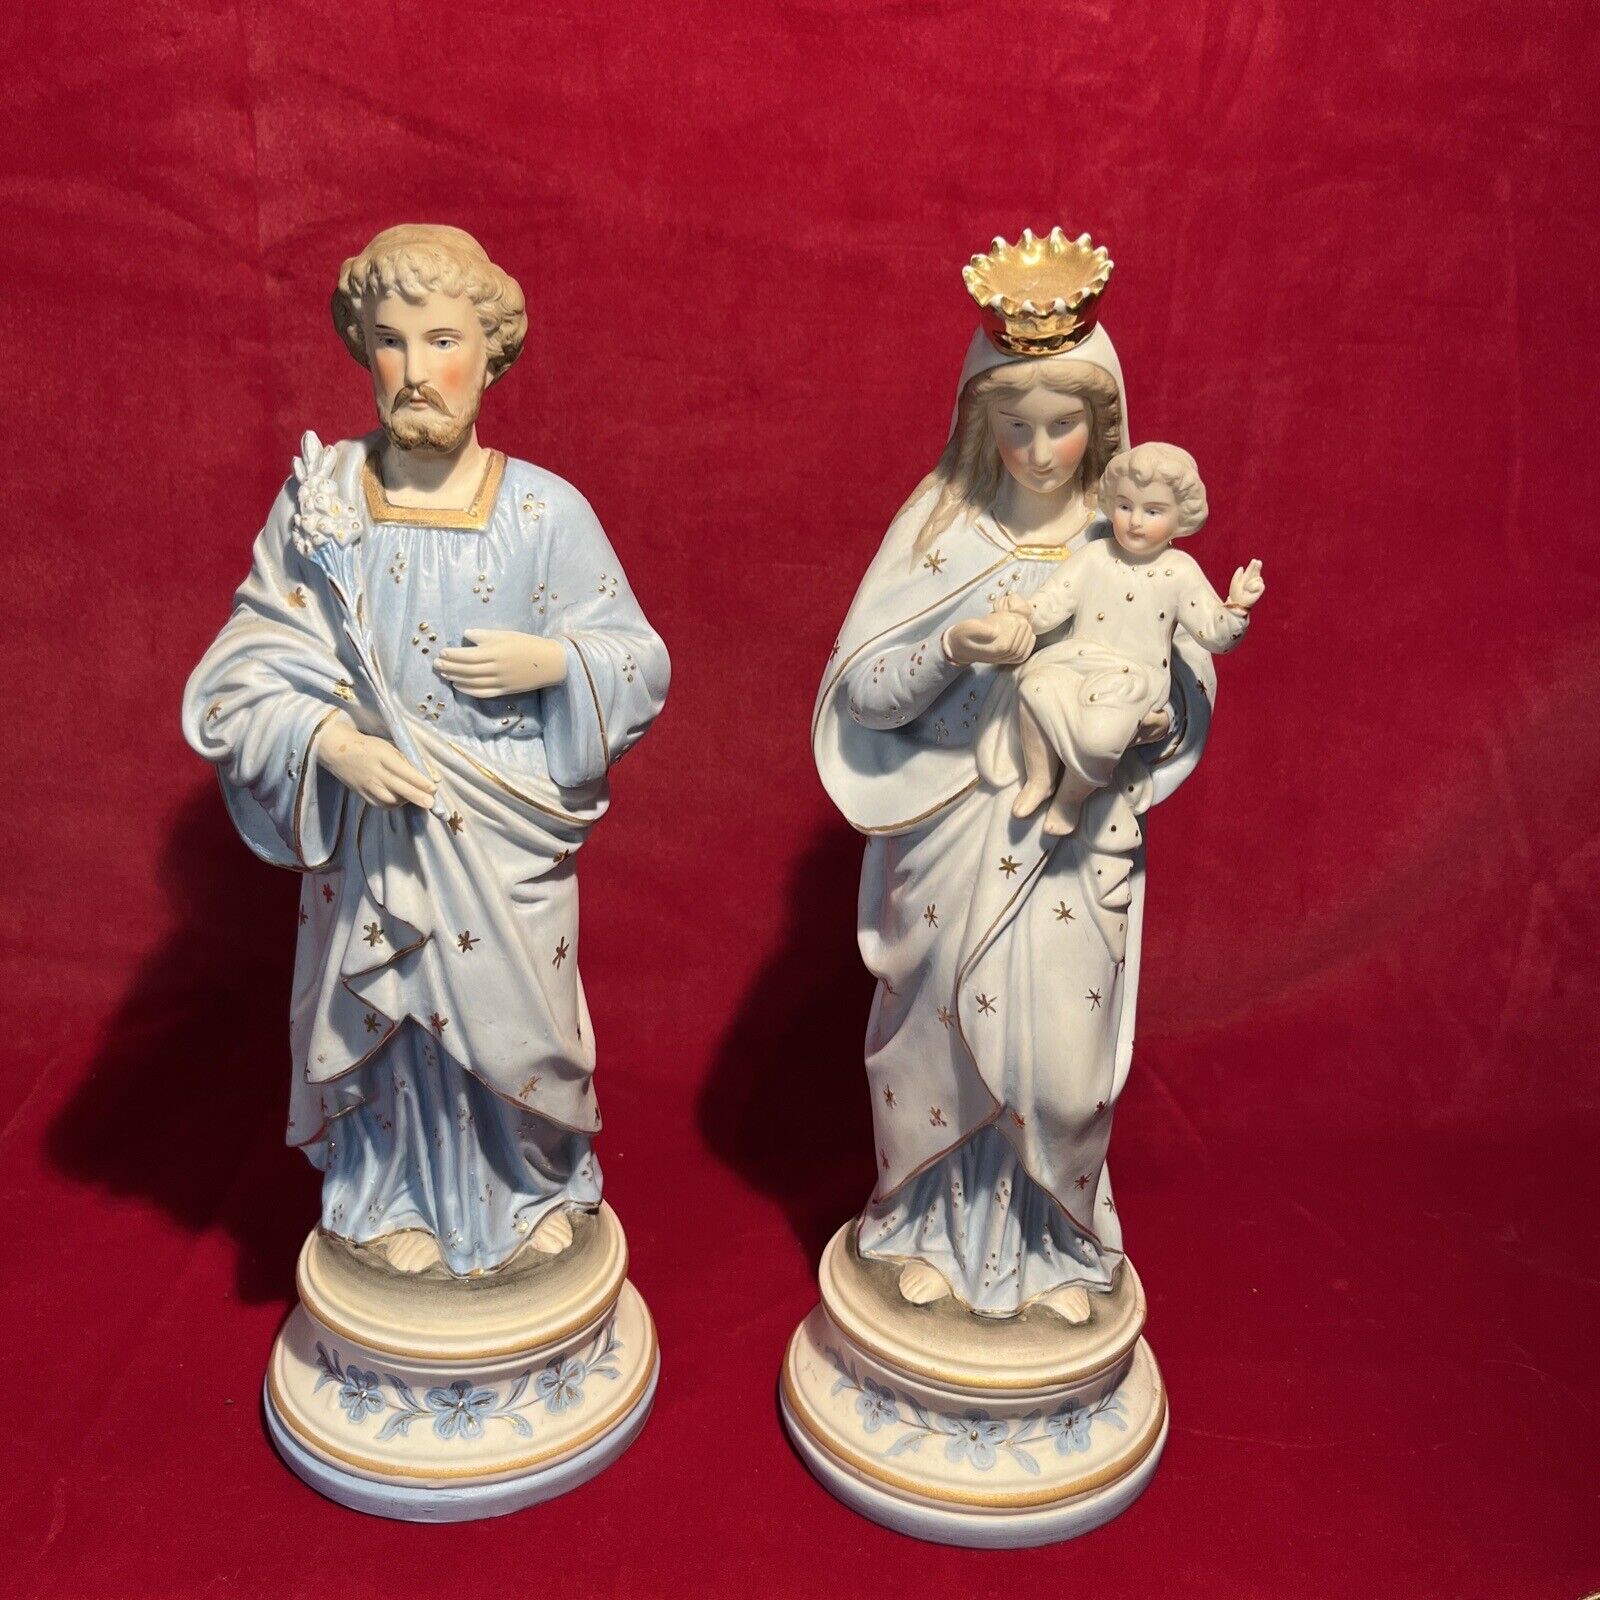 Antique  Statue Bisque Porcelain Joseph And Mary With Jesus Set (N7-3)